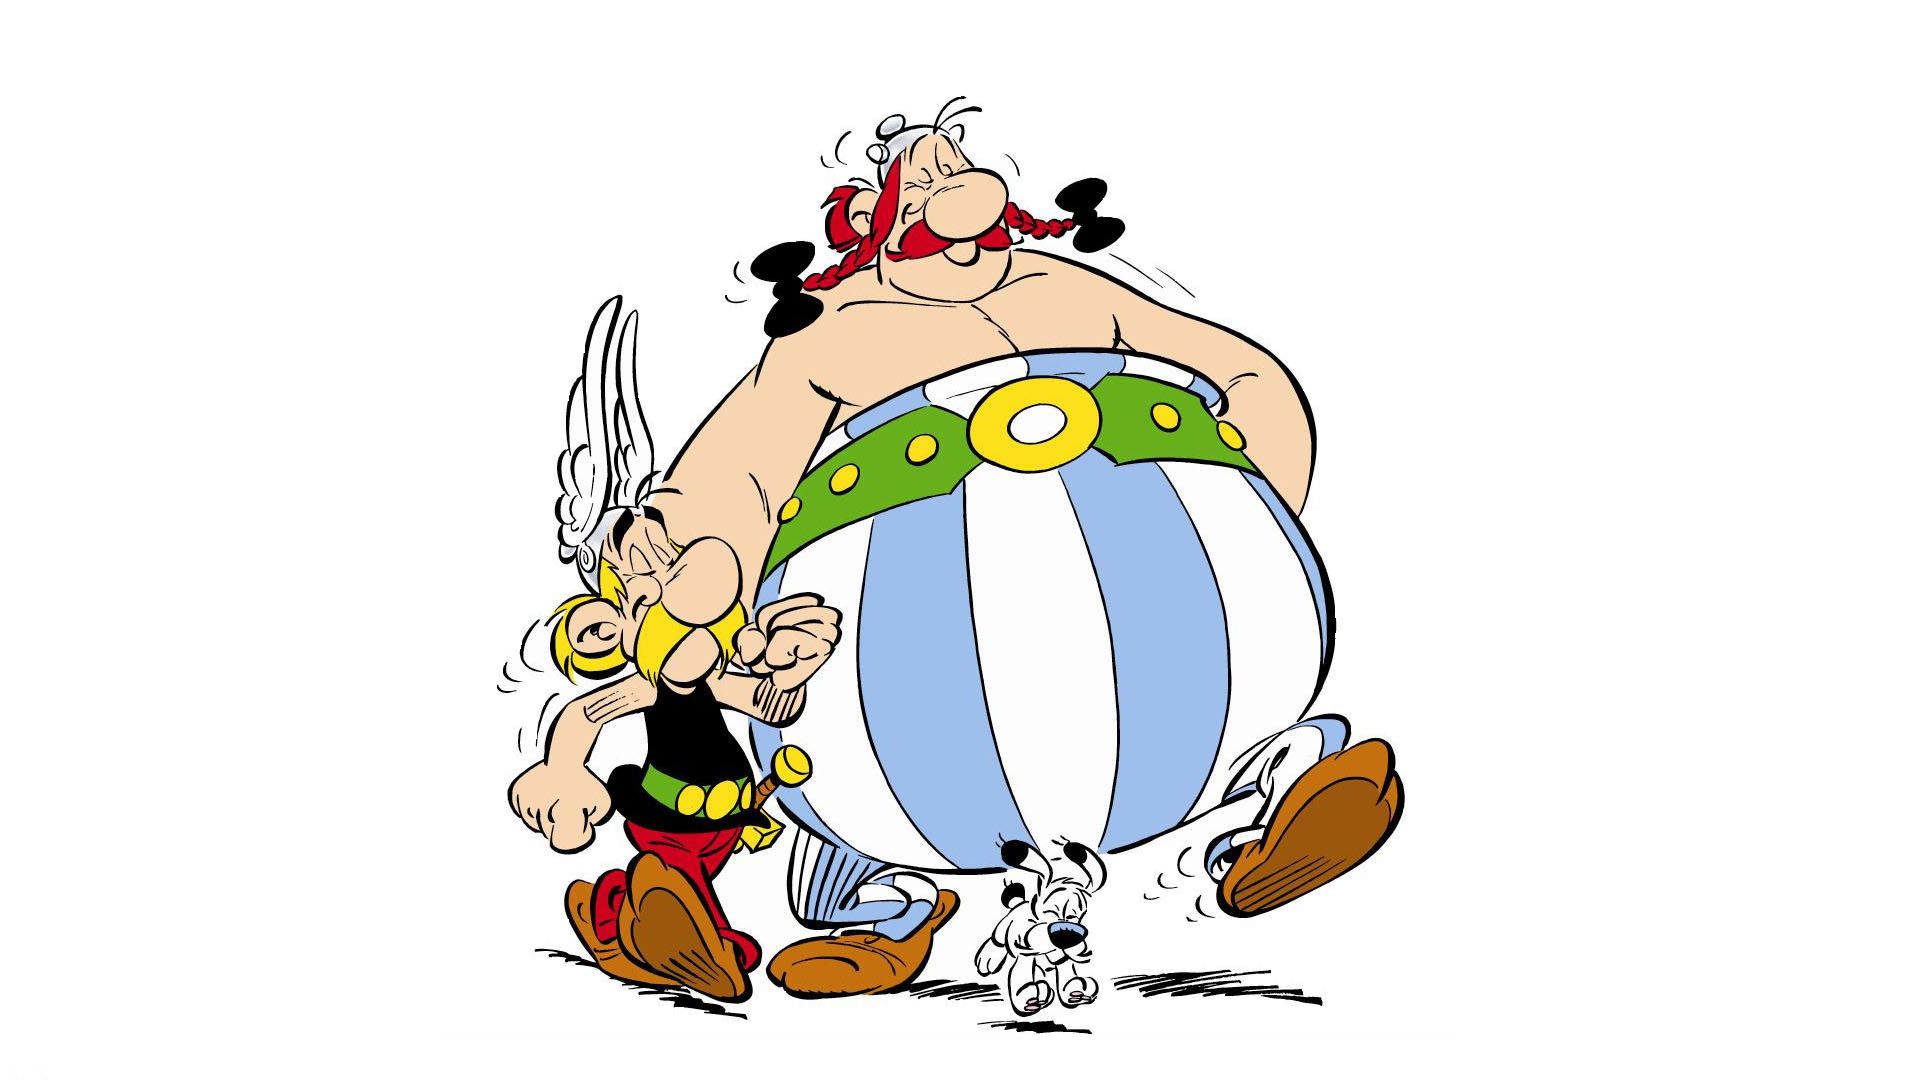 Asterix the Gaul background